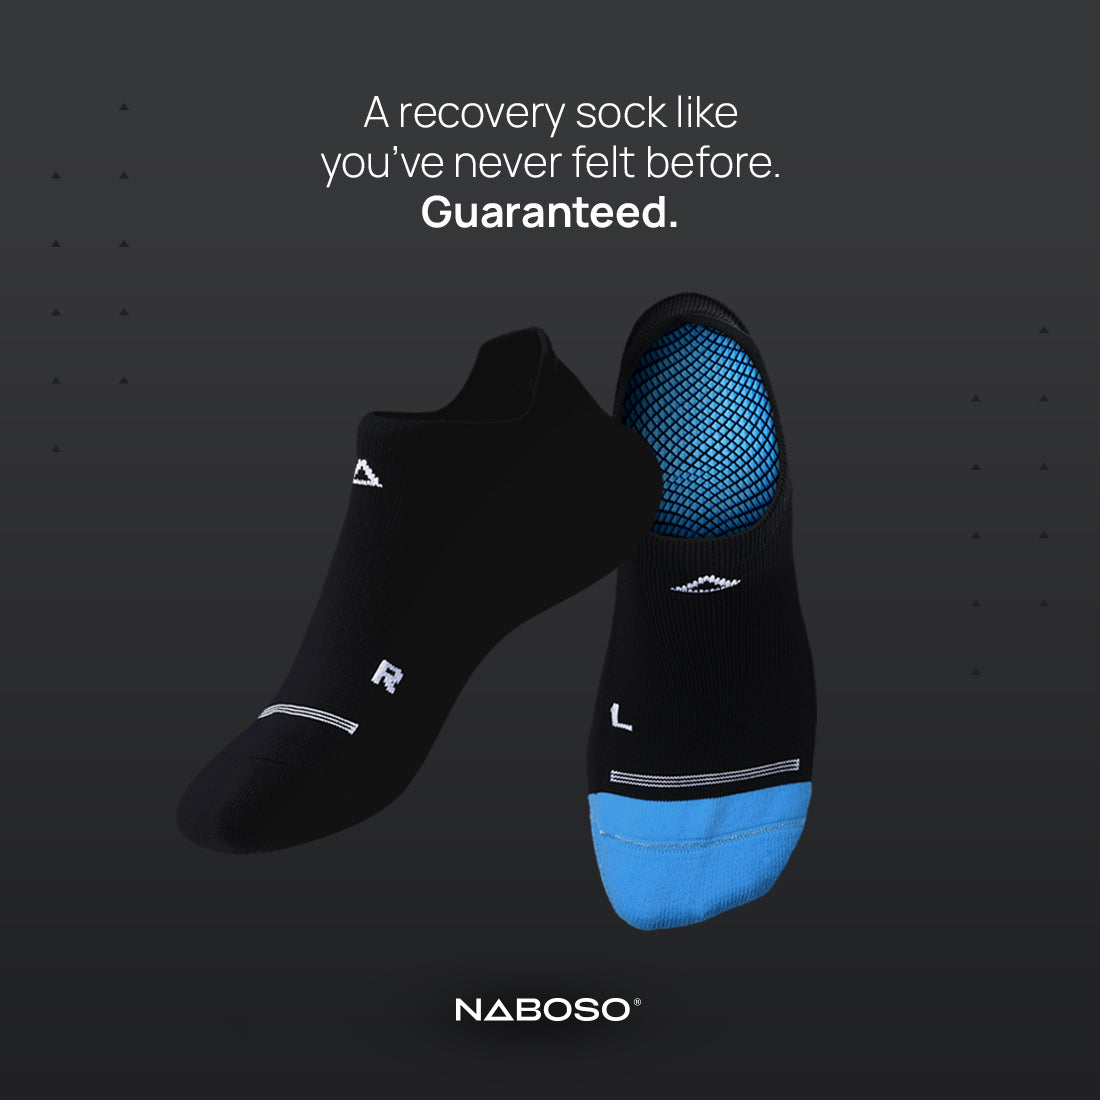 Naboso Disrupts the Footwear Recovery Category with Textured Recovery Socks